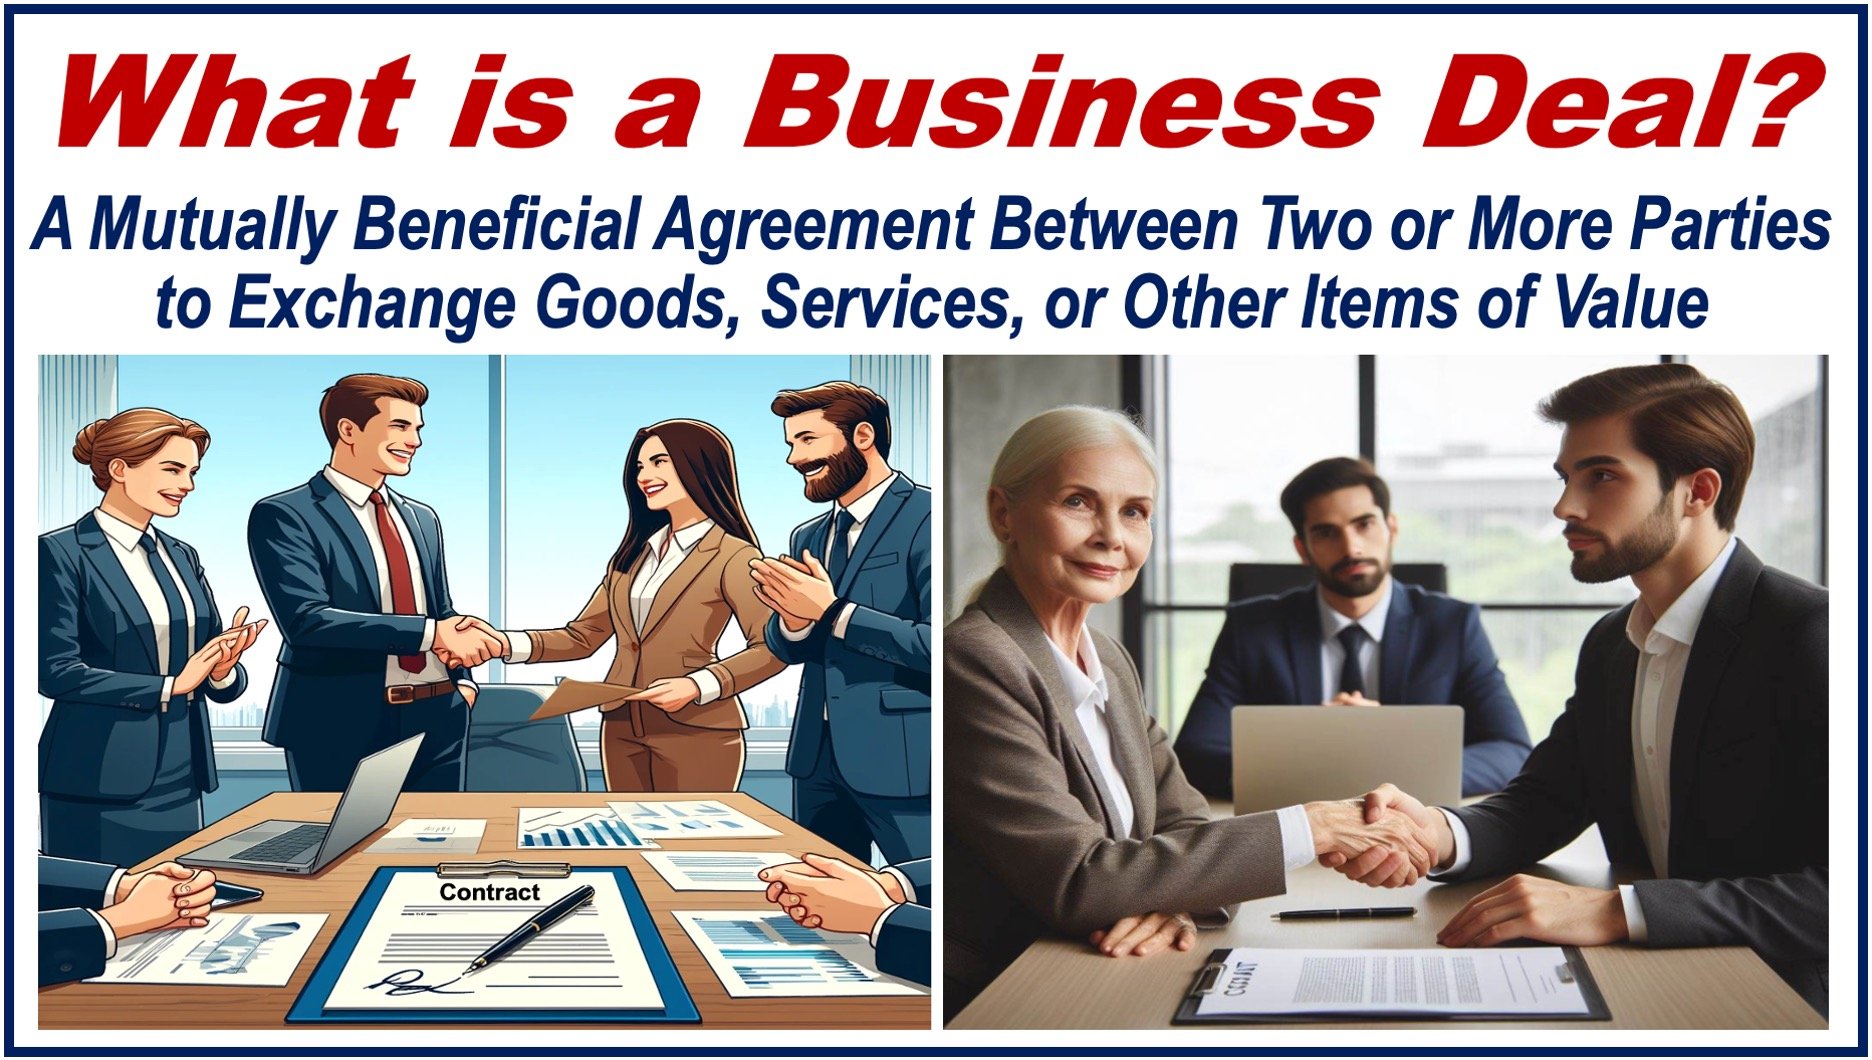 Two images of people concluded business deals